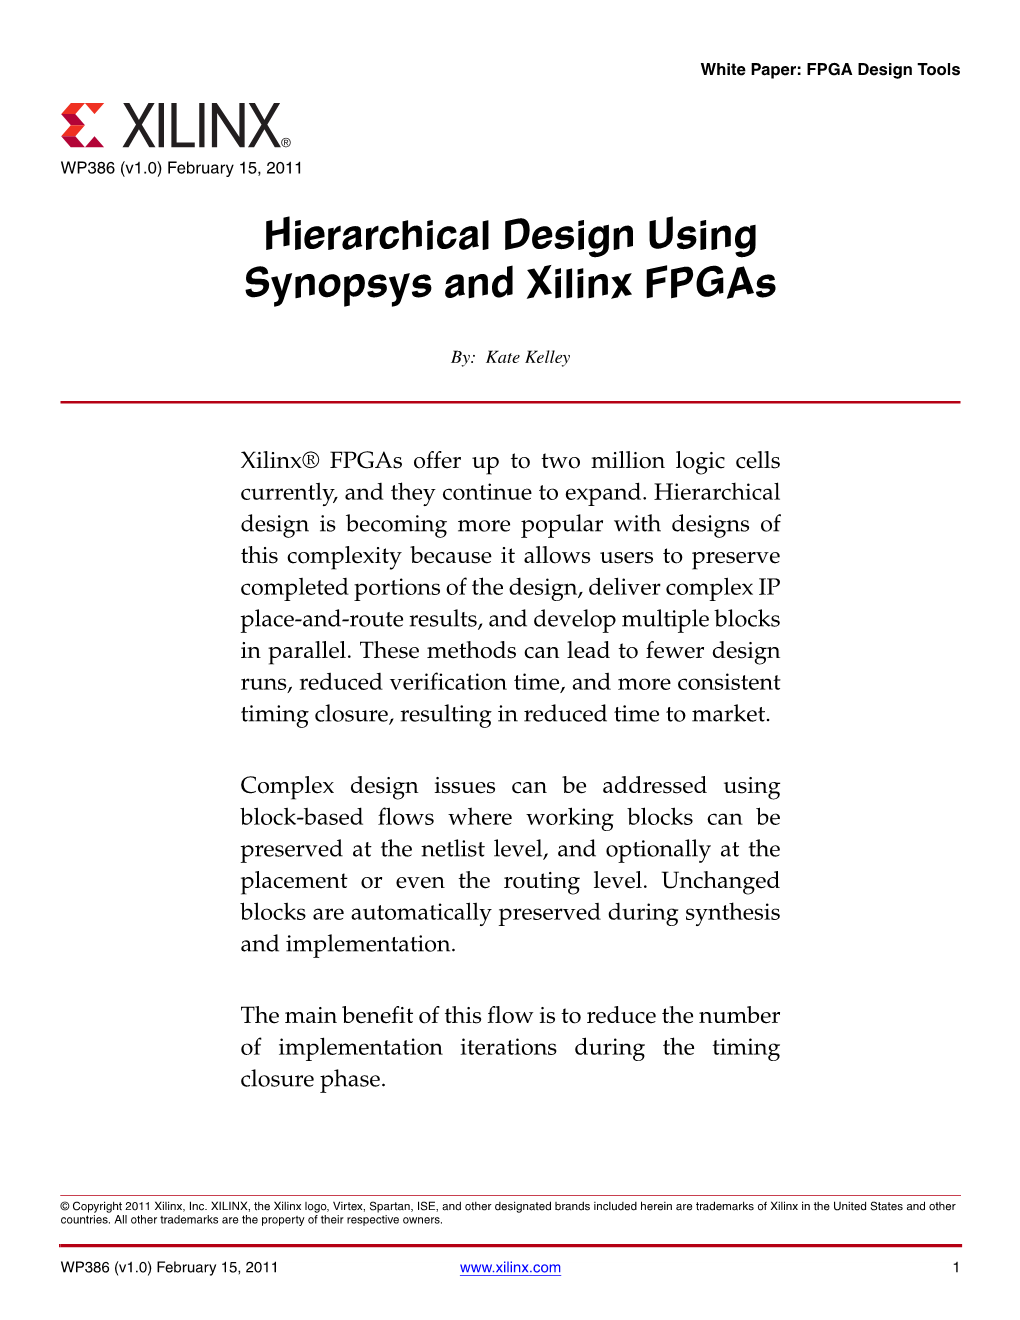 Hierarchical Design Using Synopsys and Xilinx Fpgas